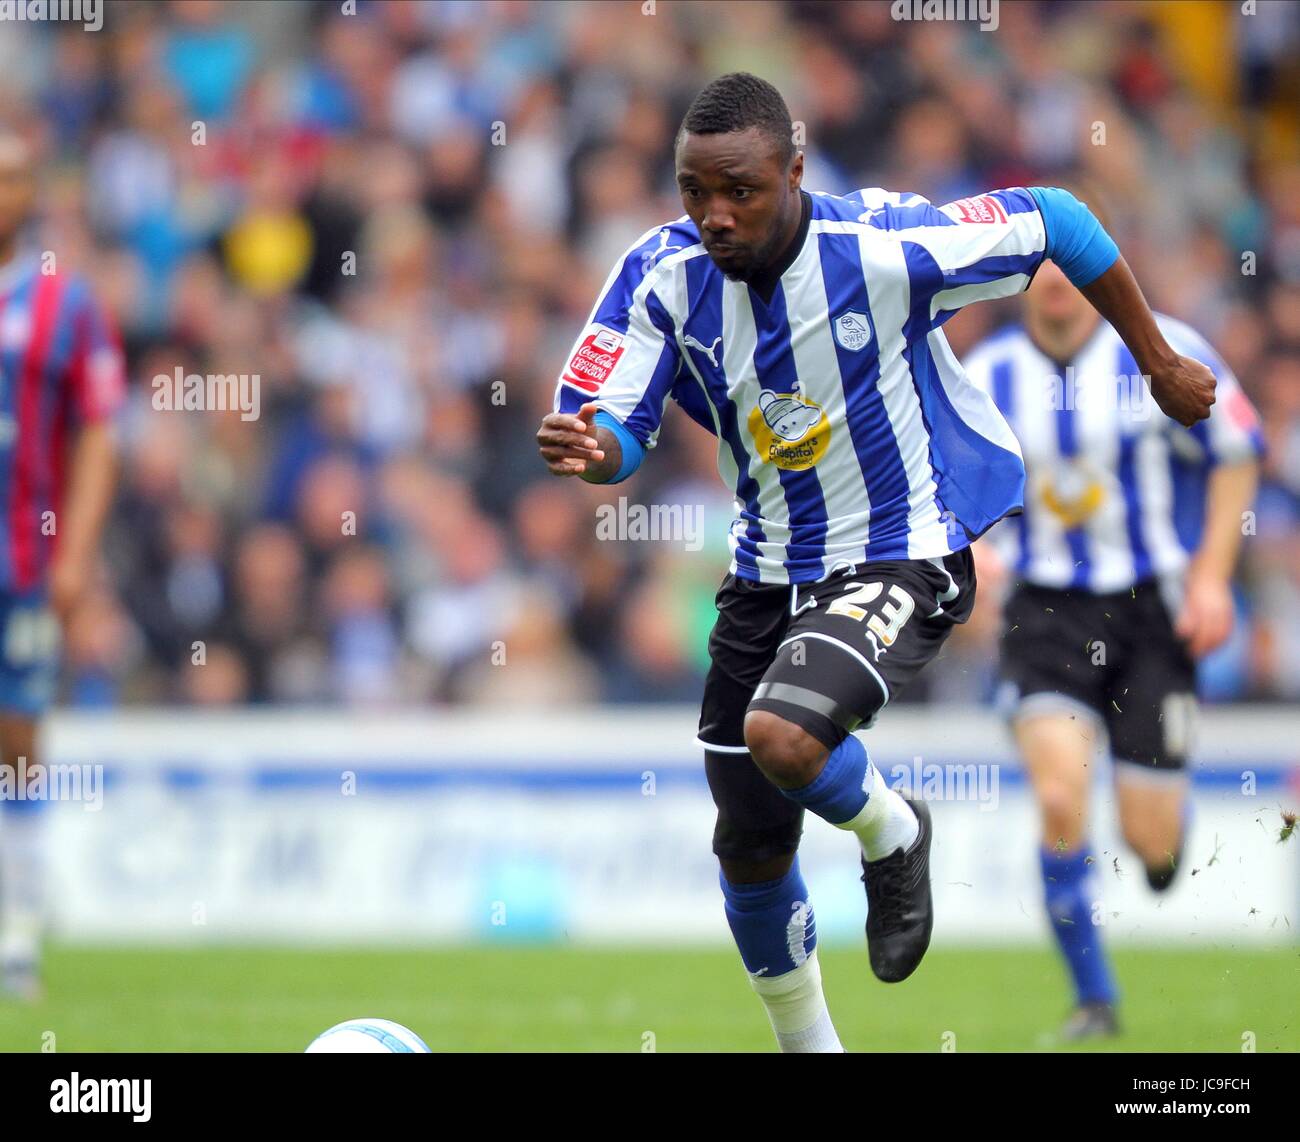 JERMAINE JOHNSON SHEFFIELD WEDNESDAY FC SHEFFIELD WEDNESDAY FC HILLSBOROUGH SHEFFIELD ENGLAND 02 Mai 2010 Banque D'Images